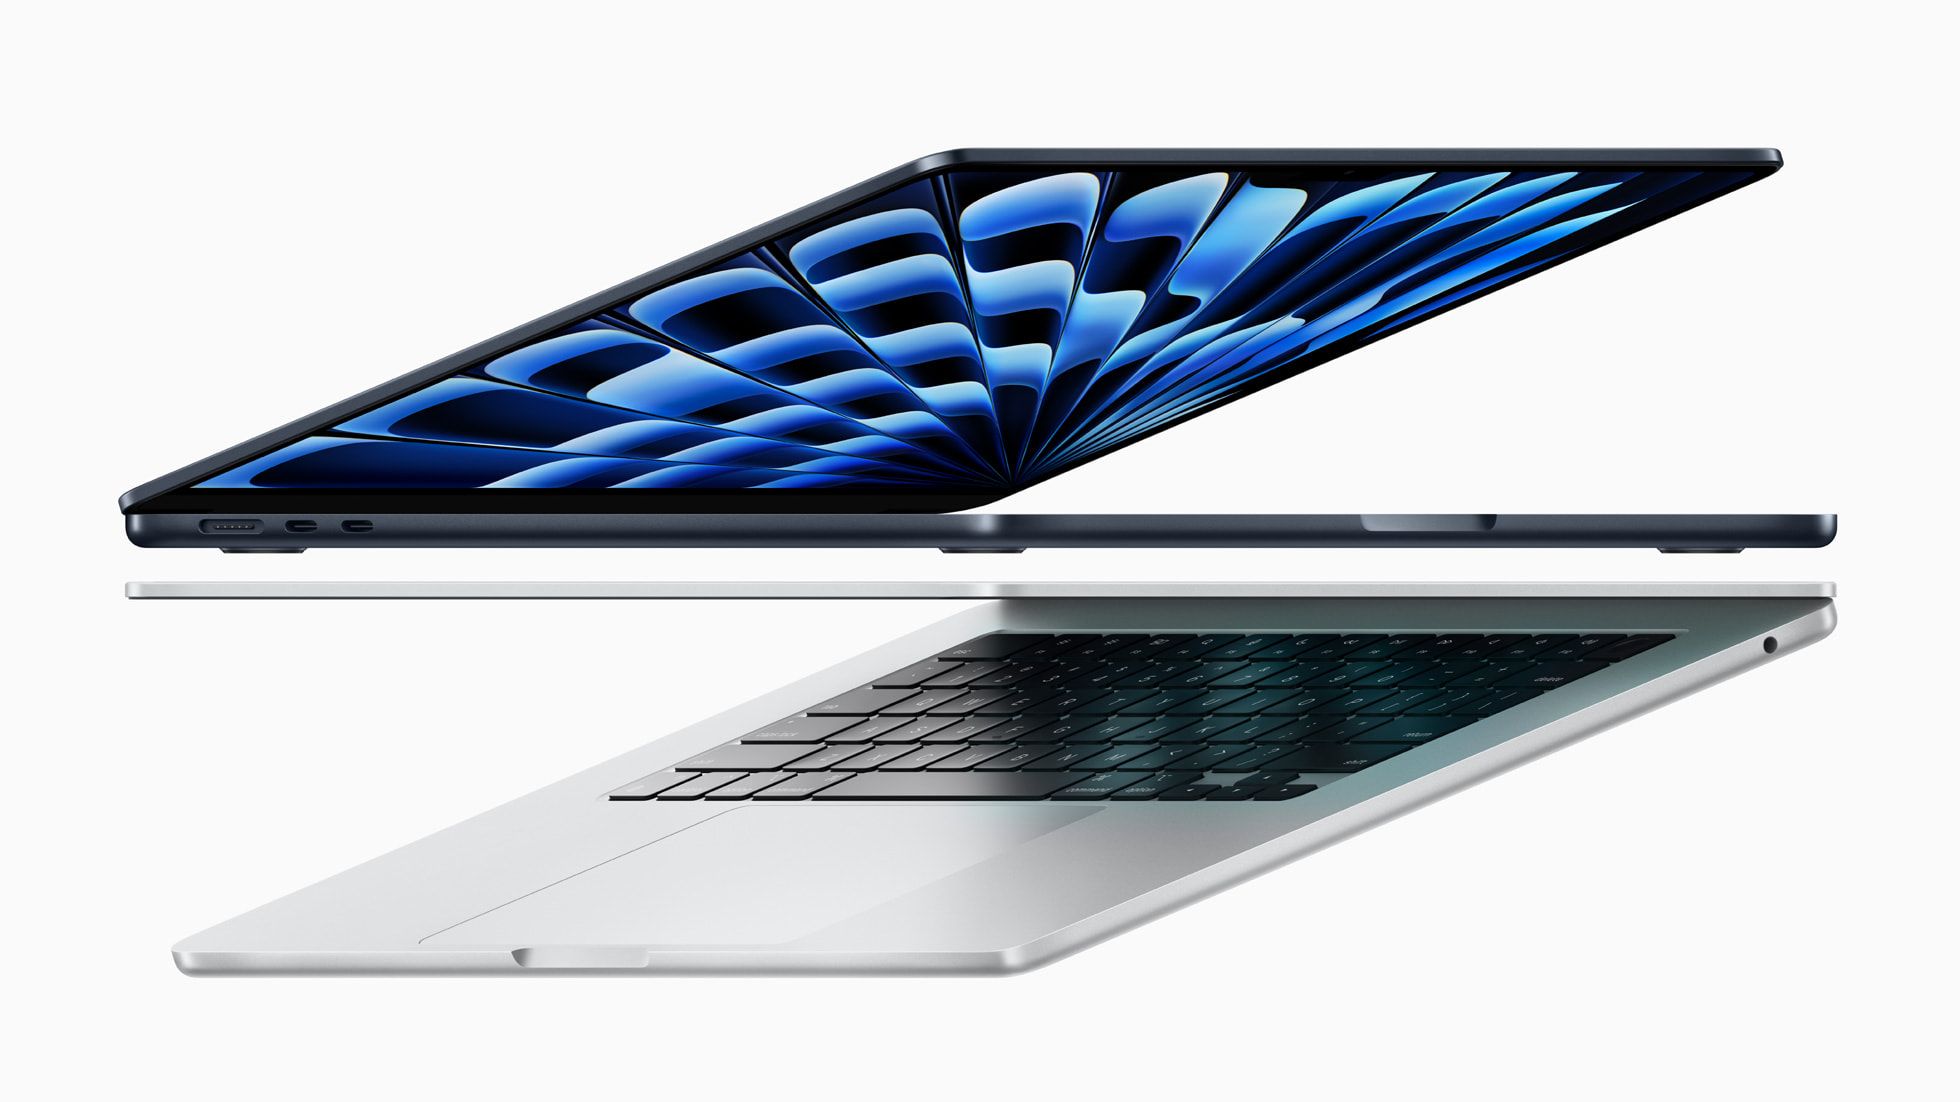 Apple’s new M3powered MacBook Air models are here with more power and